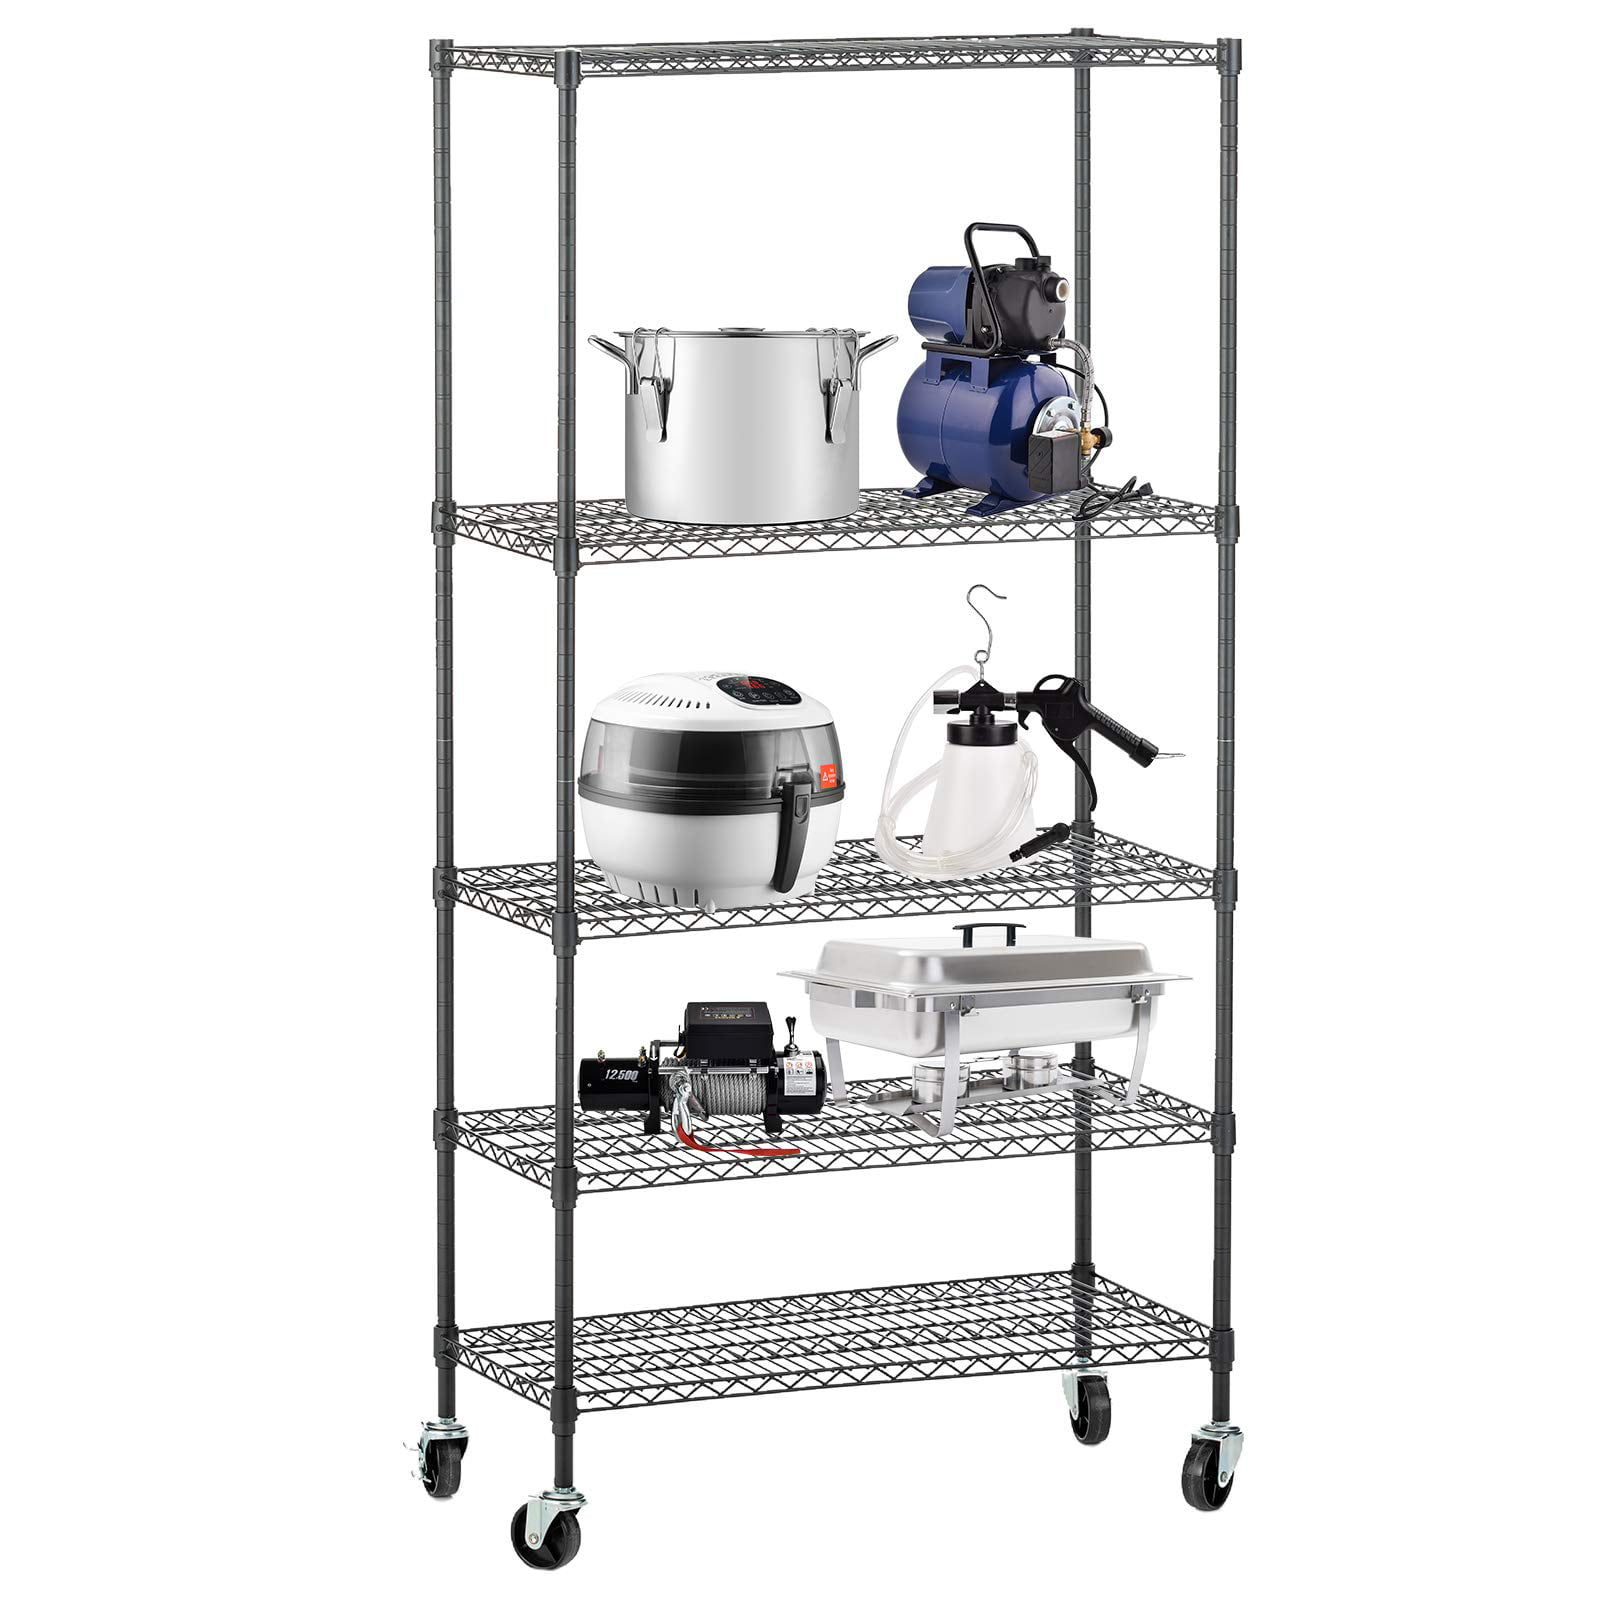 Suncoo 5 Tier Strengthen Commercial, Moveable Shelving Units